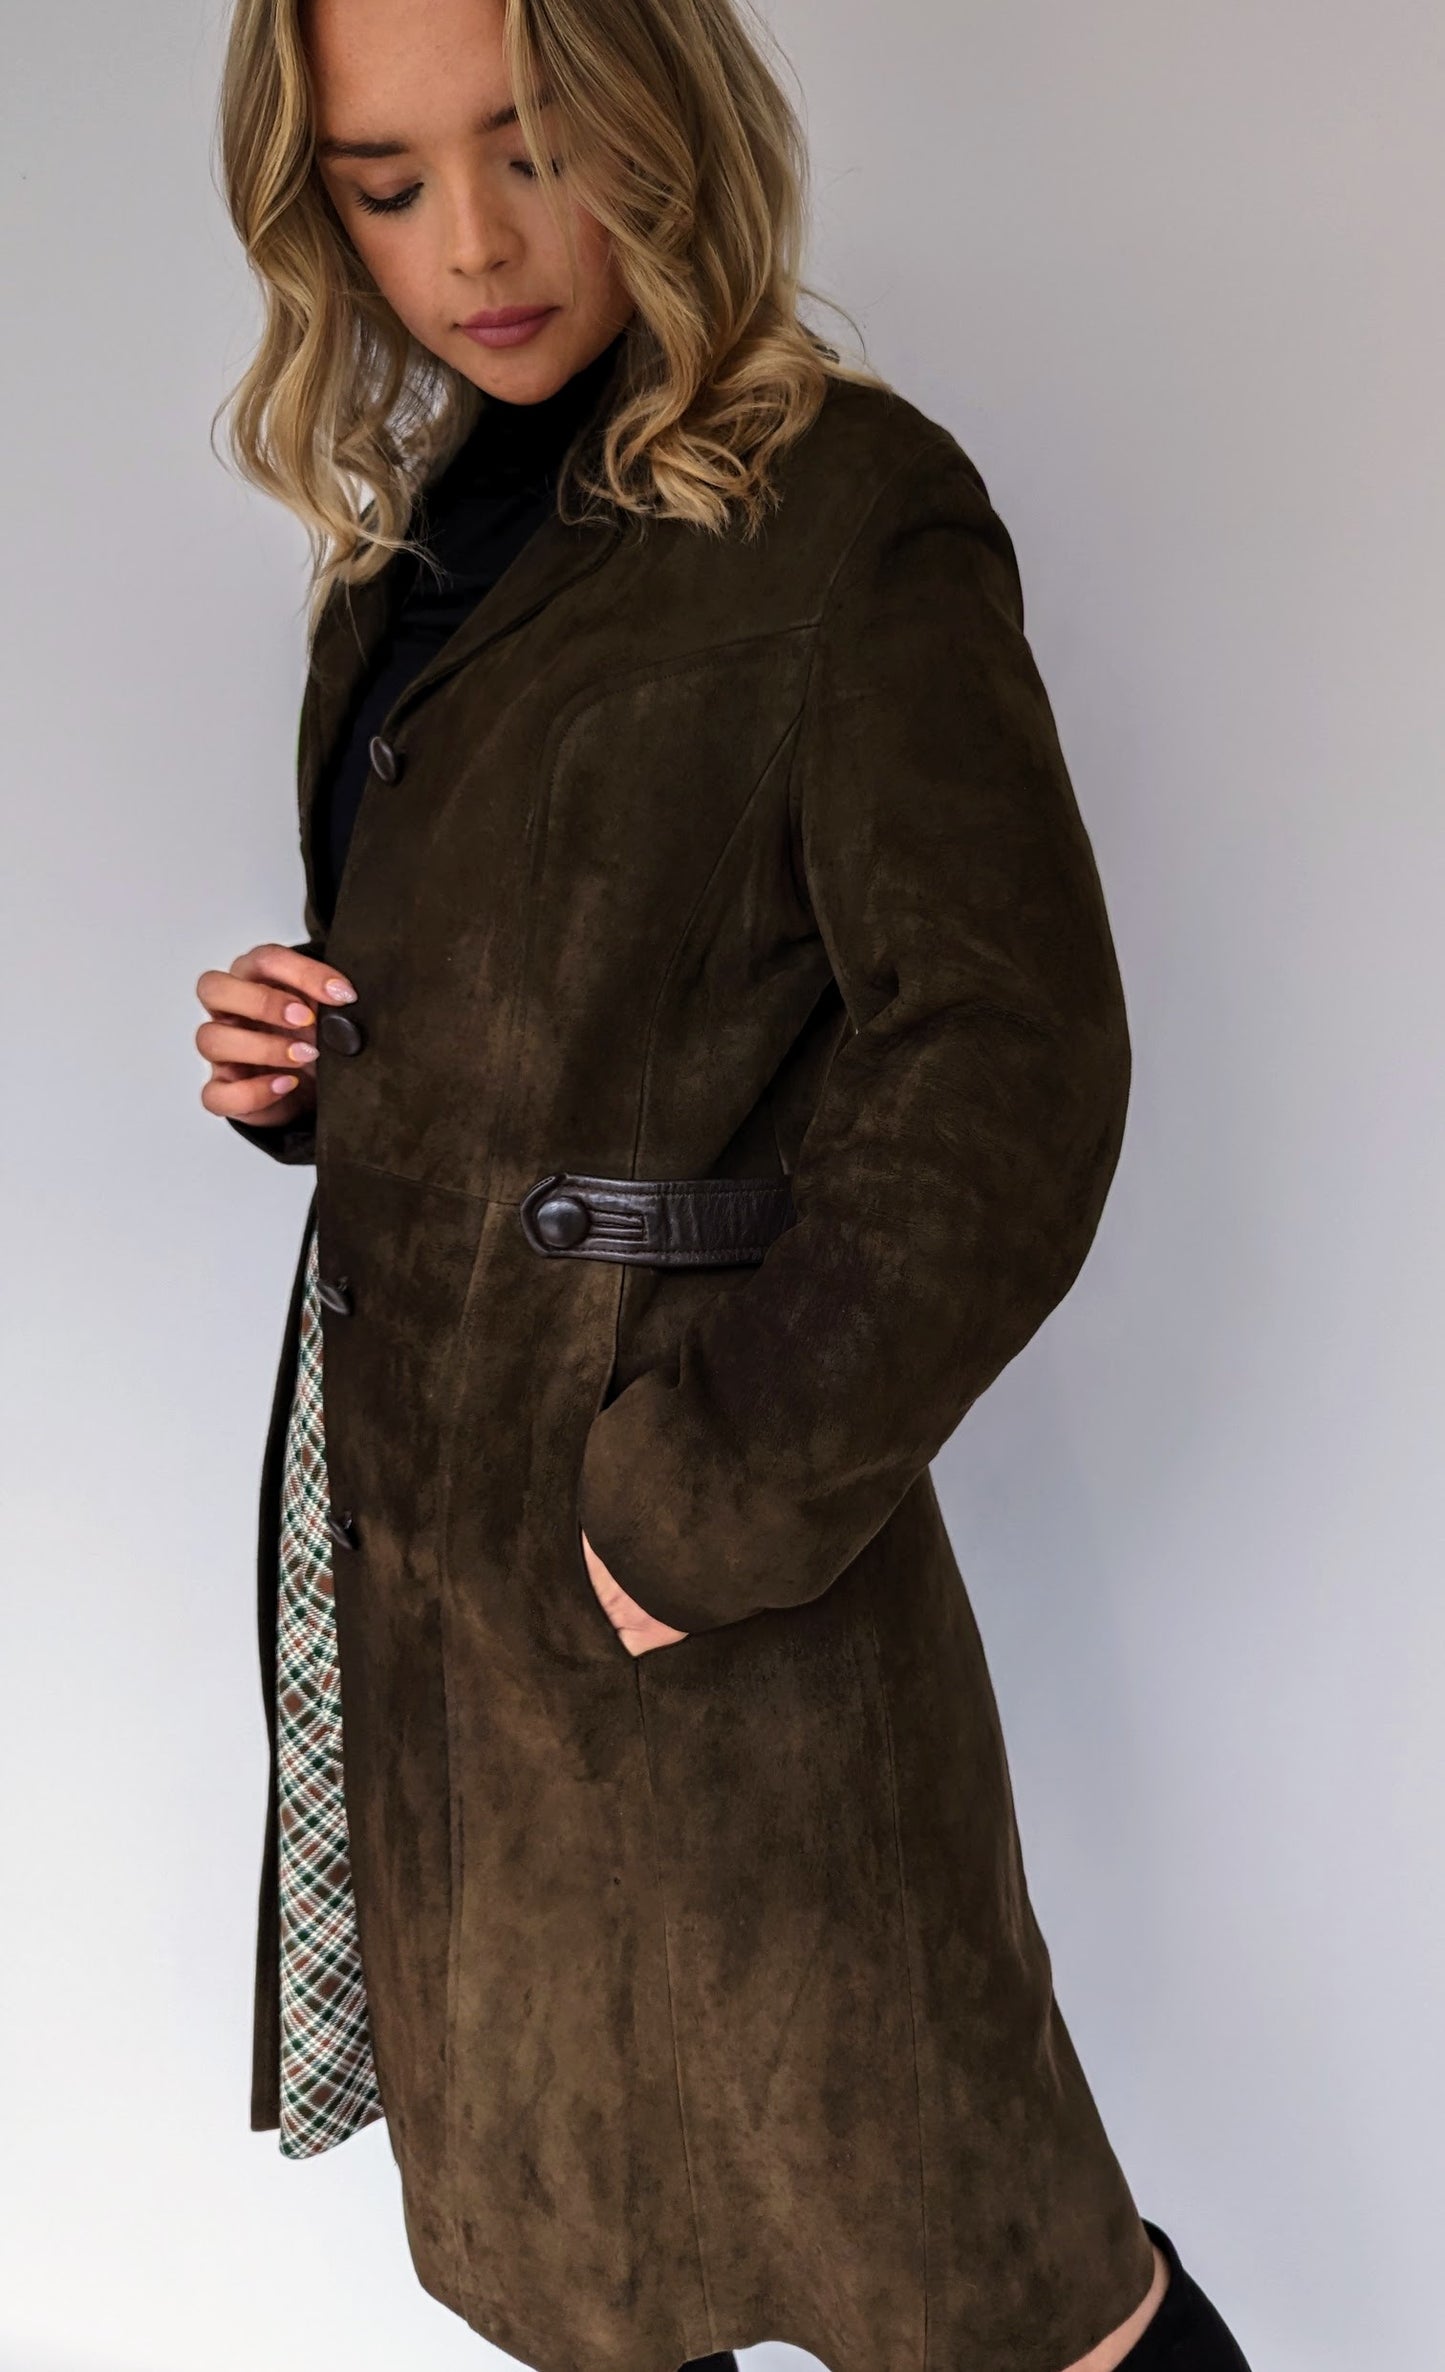 Women's Vintage 60s Long Brown Suede Coat with leather trim and belt